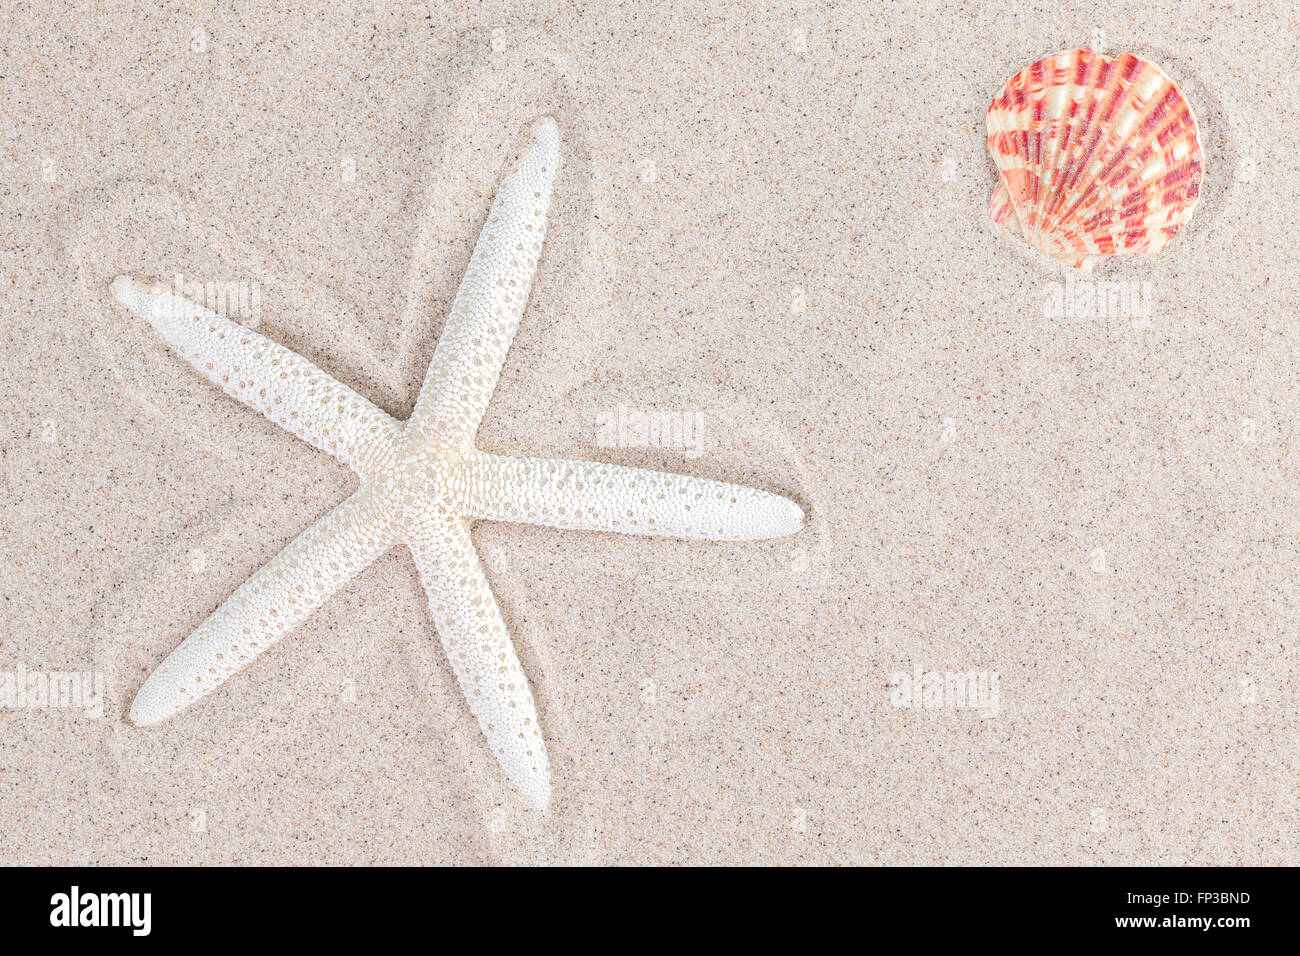 Starfish and a shell on sand, summer background. Stock Photo